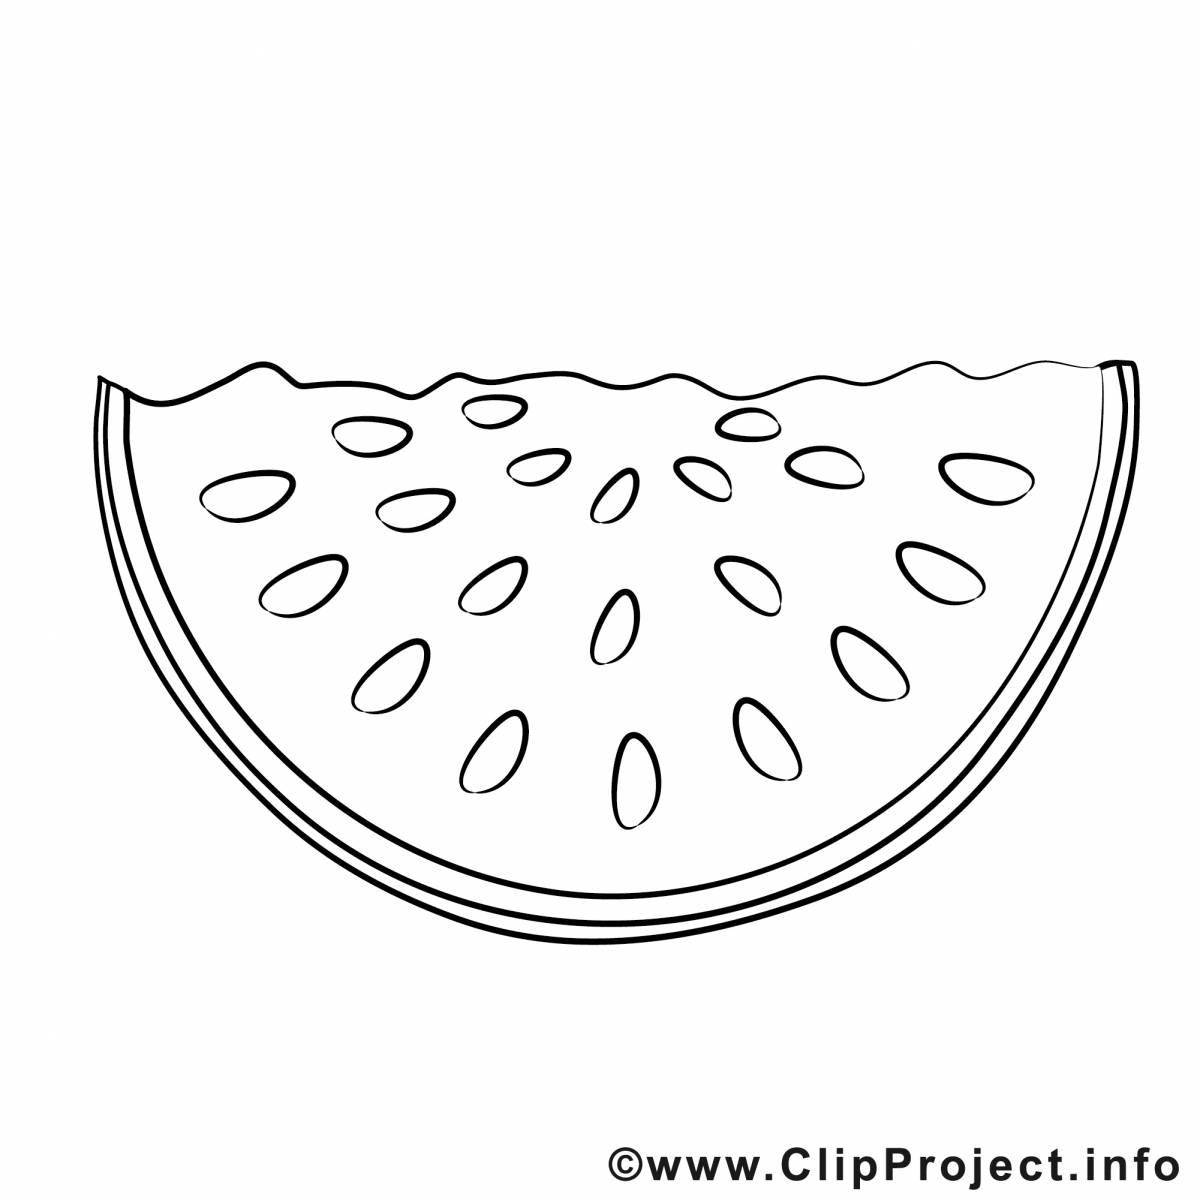 Colorful watermelon slice coloring page